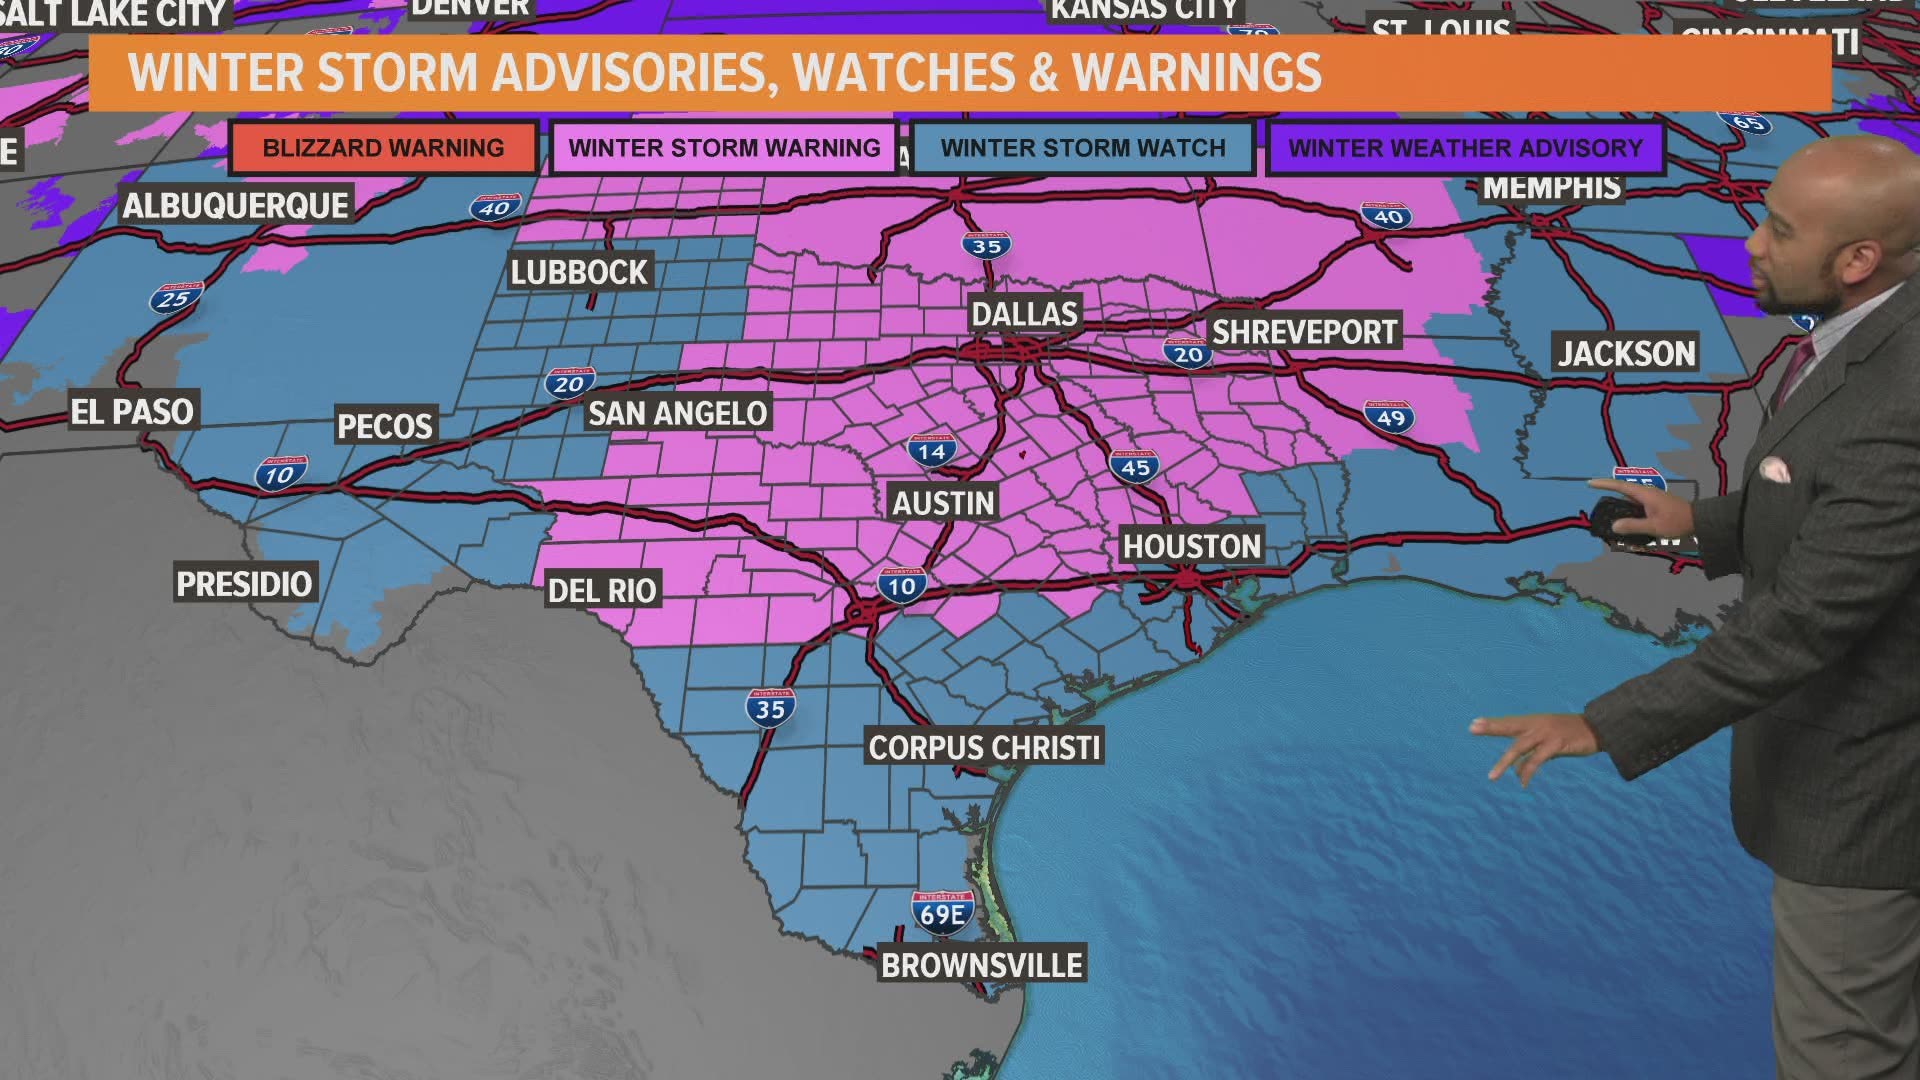 Several counties north and west of Houston will be under a Winter Storm Warning starting Saturday night. Some of those counties could get a few inches of snow.